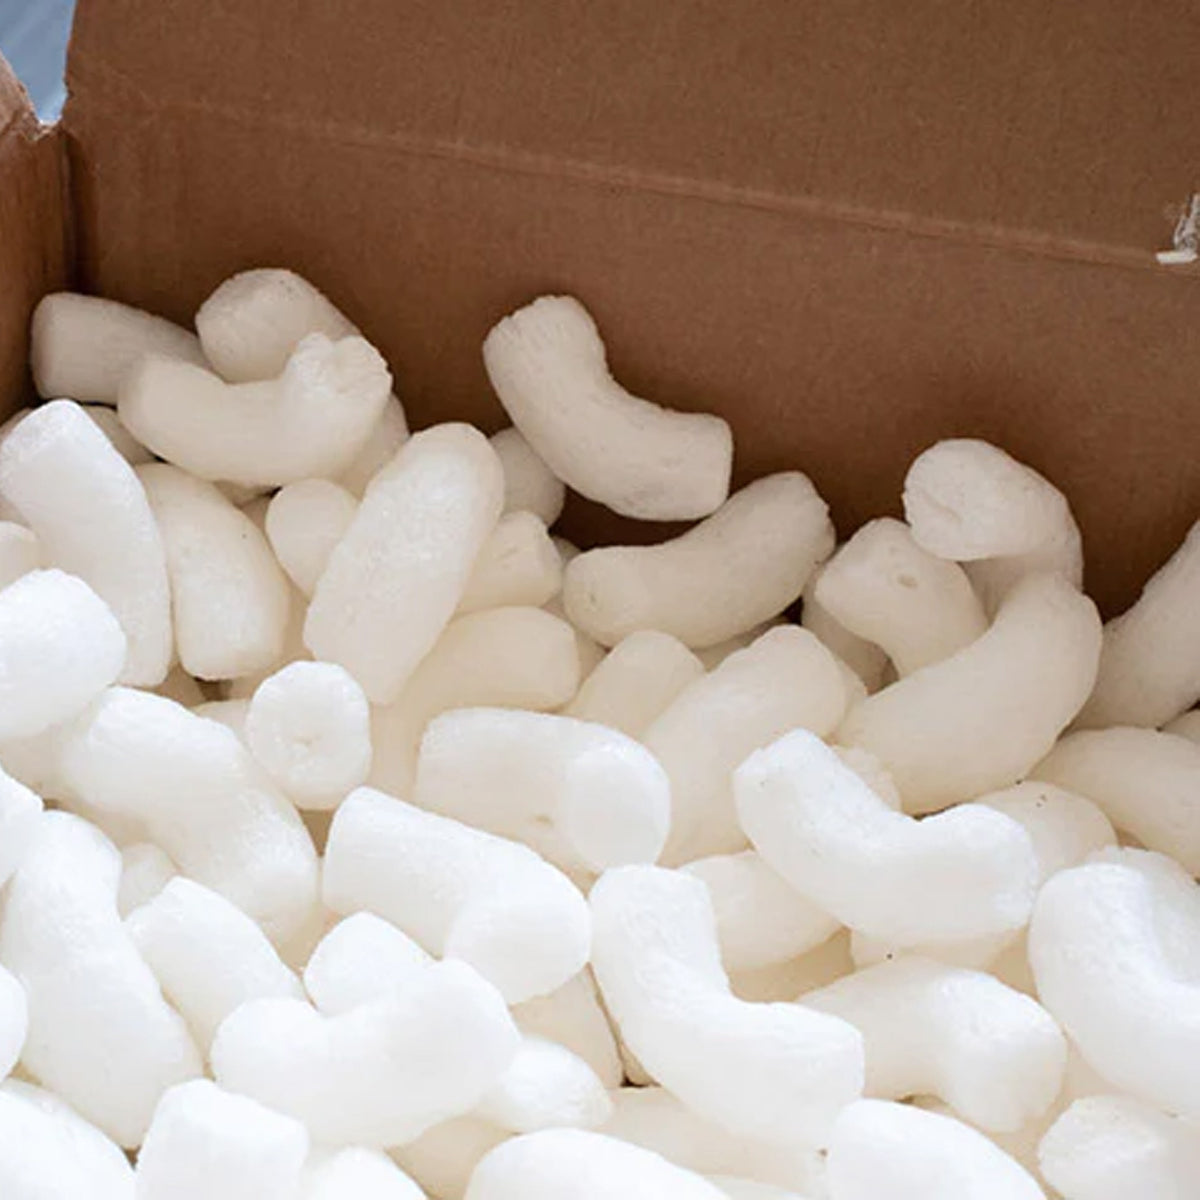 Packing With Biodegradeable Packing Peanuts